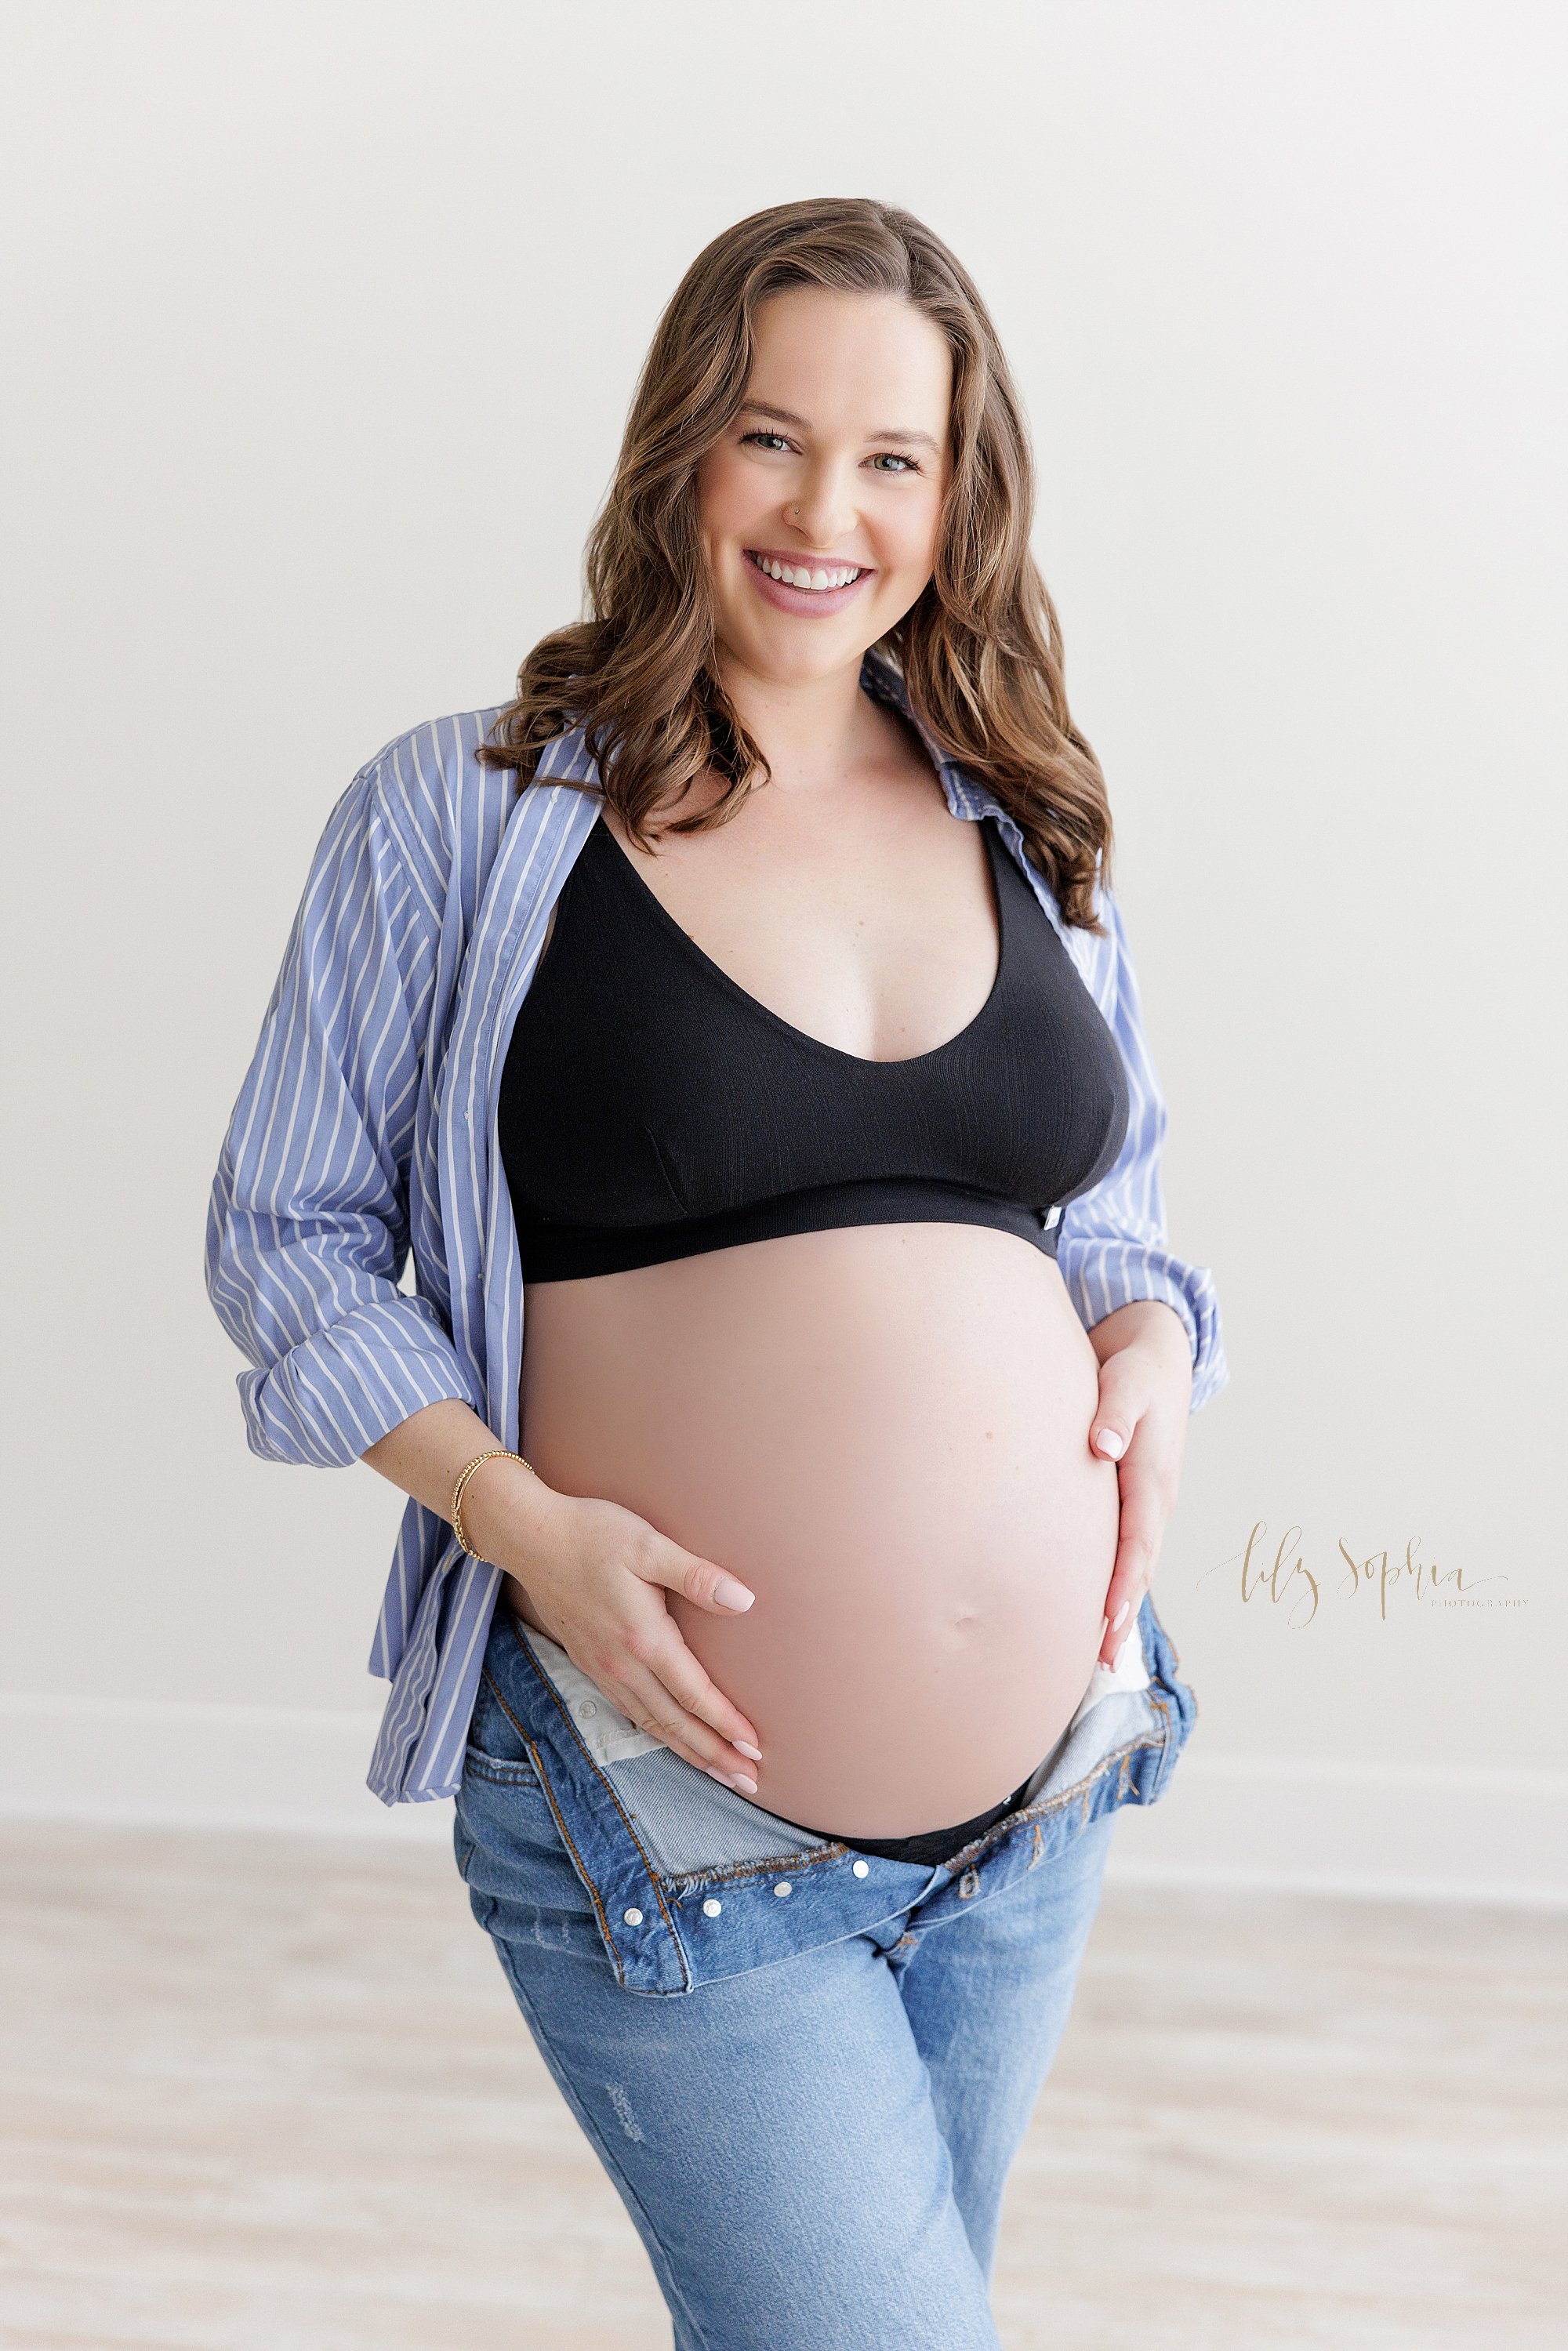  Casual maternity photo session with a young mother as she stands in a studio wearing a pair of blue jeans, a black bra, and an opened button down blue and white striped chambray shirt with her bare belly showing as the blue jeans are unbuttoned and 